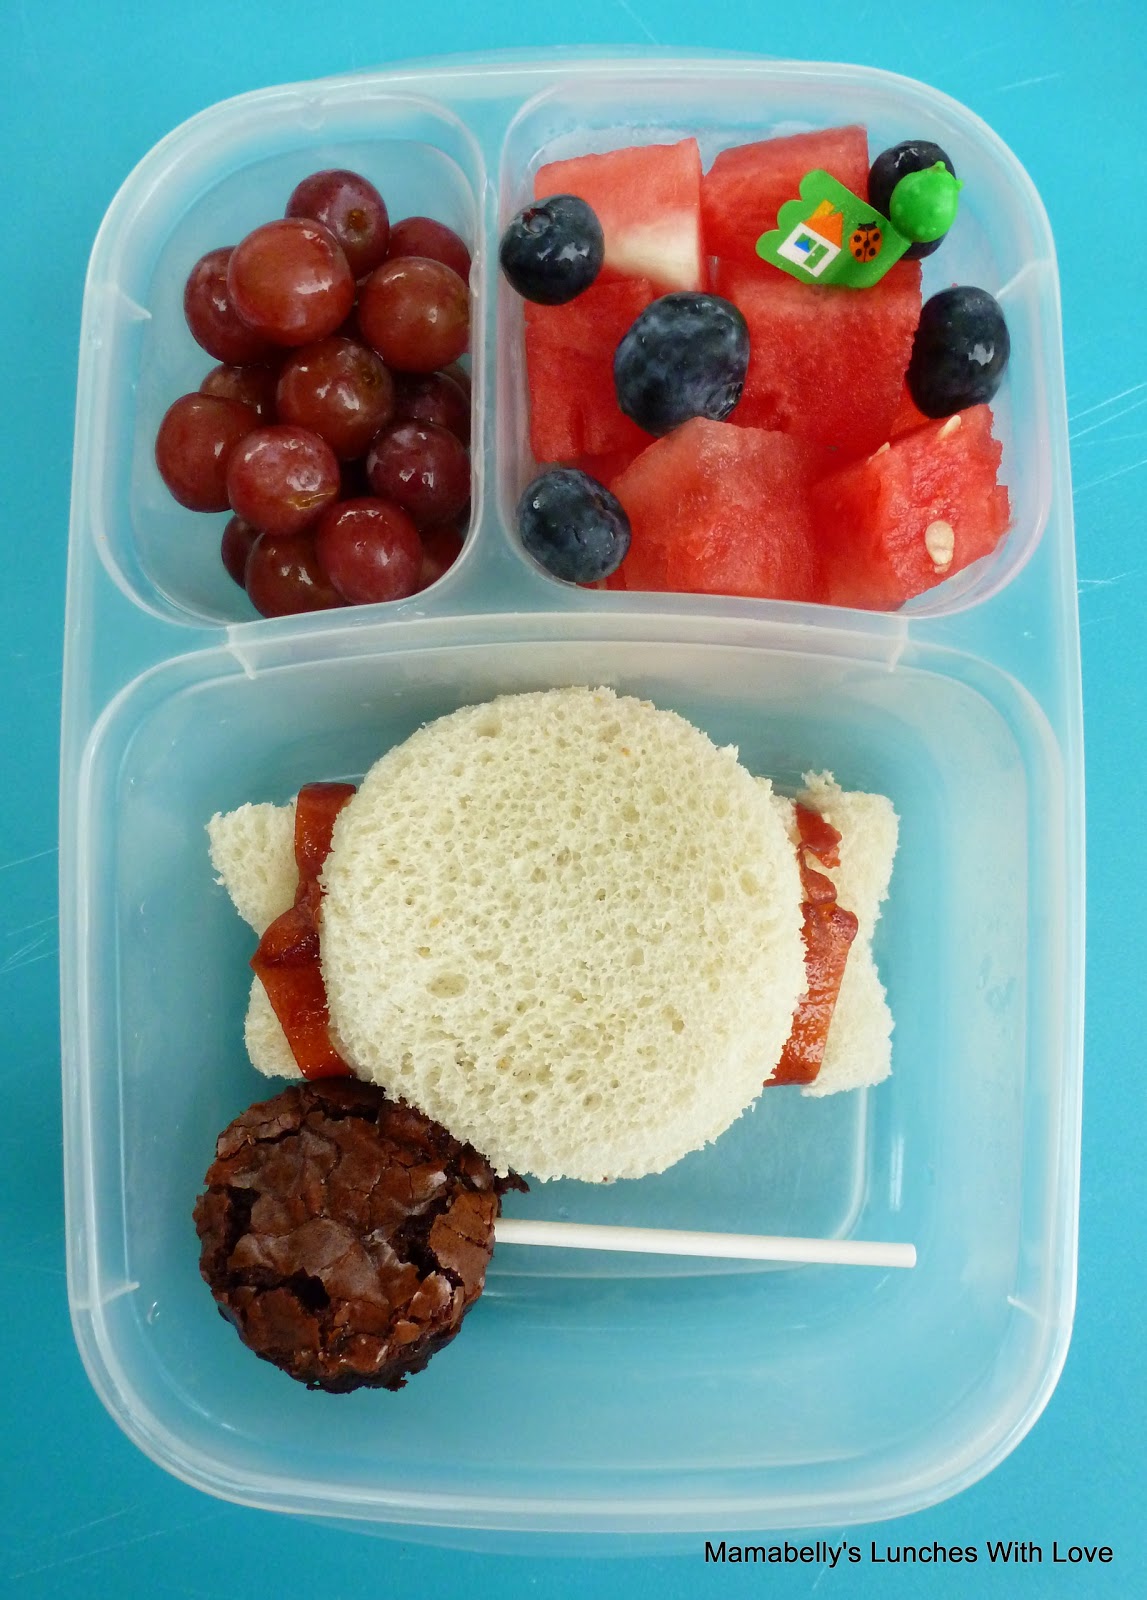 Mamabelly's Lunches With Love: Fun Lunch for a Fun Fair Day